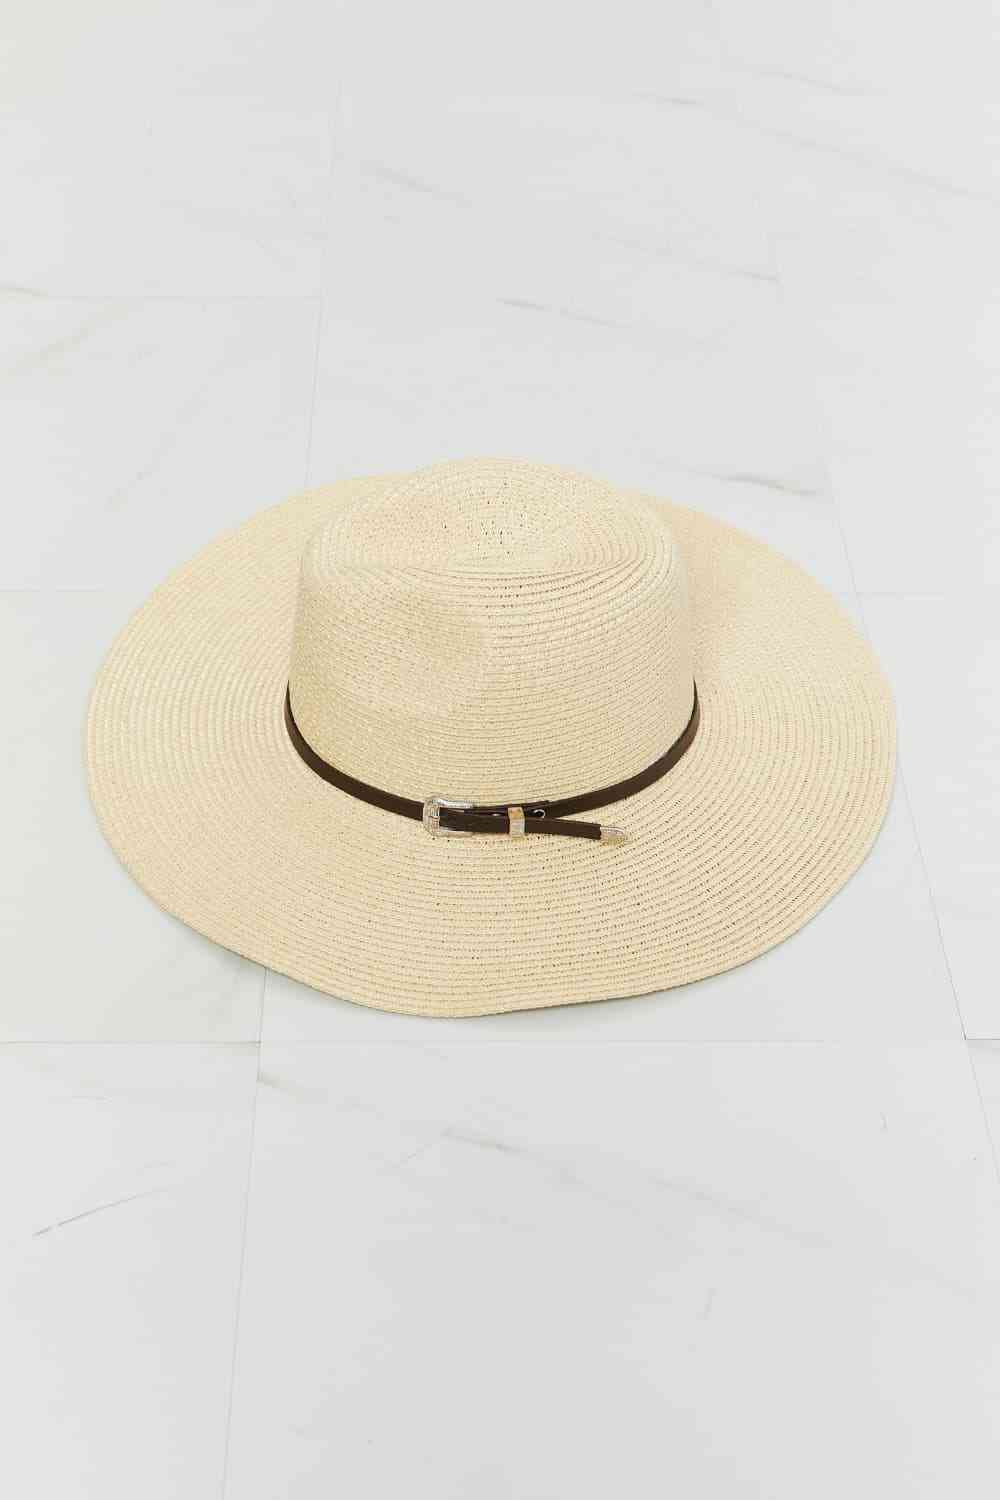 Boho Summer Straw Fedora Hat - Kawaii Stop - Adjustable Straps, Belt Buckle Detailing, Chic and Sophisticated, Comfortable Fit, Fame Accessories, High-Quality Material, Lightweight, Ship from USA, Straw Fedora Hat, Stylish Accessories, Sun-Ready Style, Trendy, Wardrobe Essential